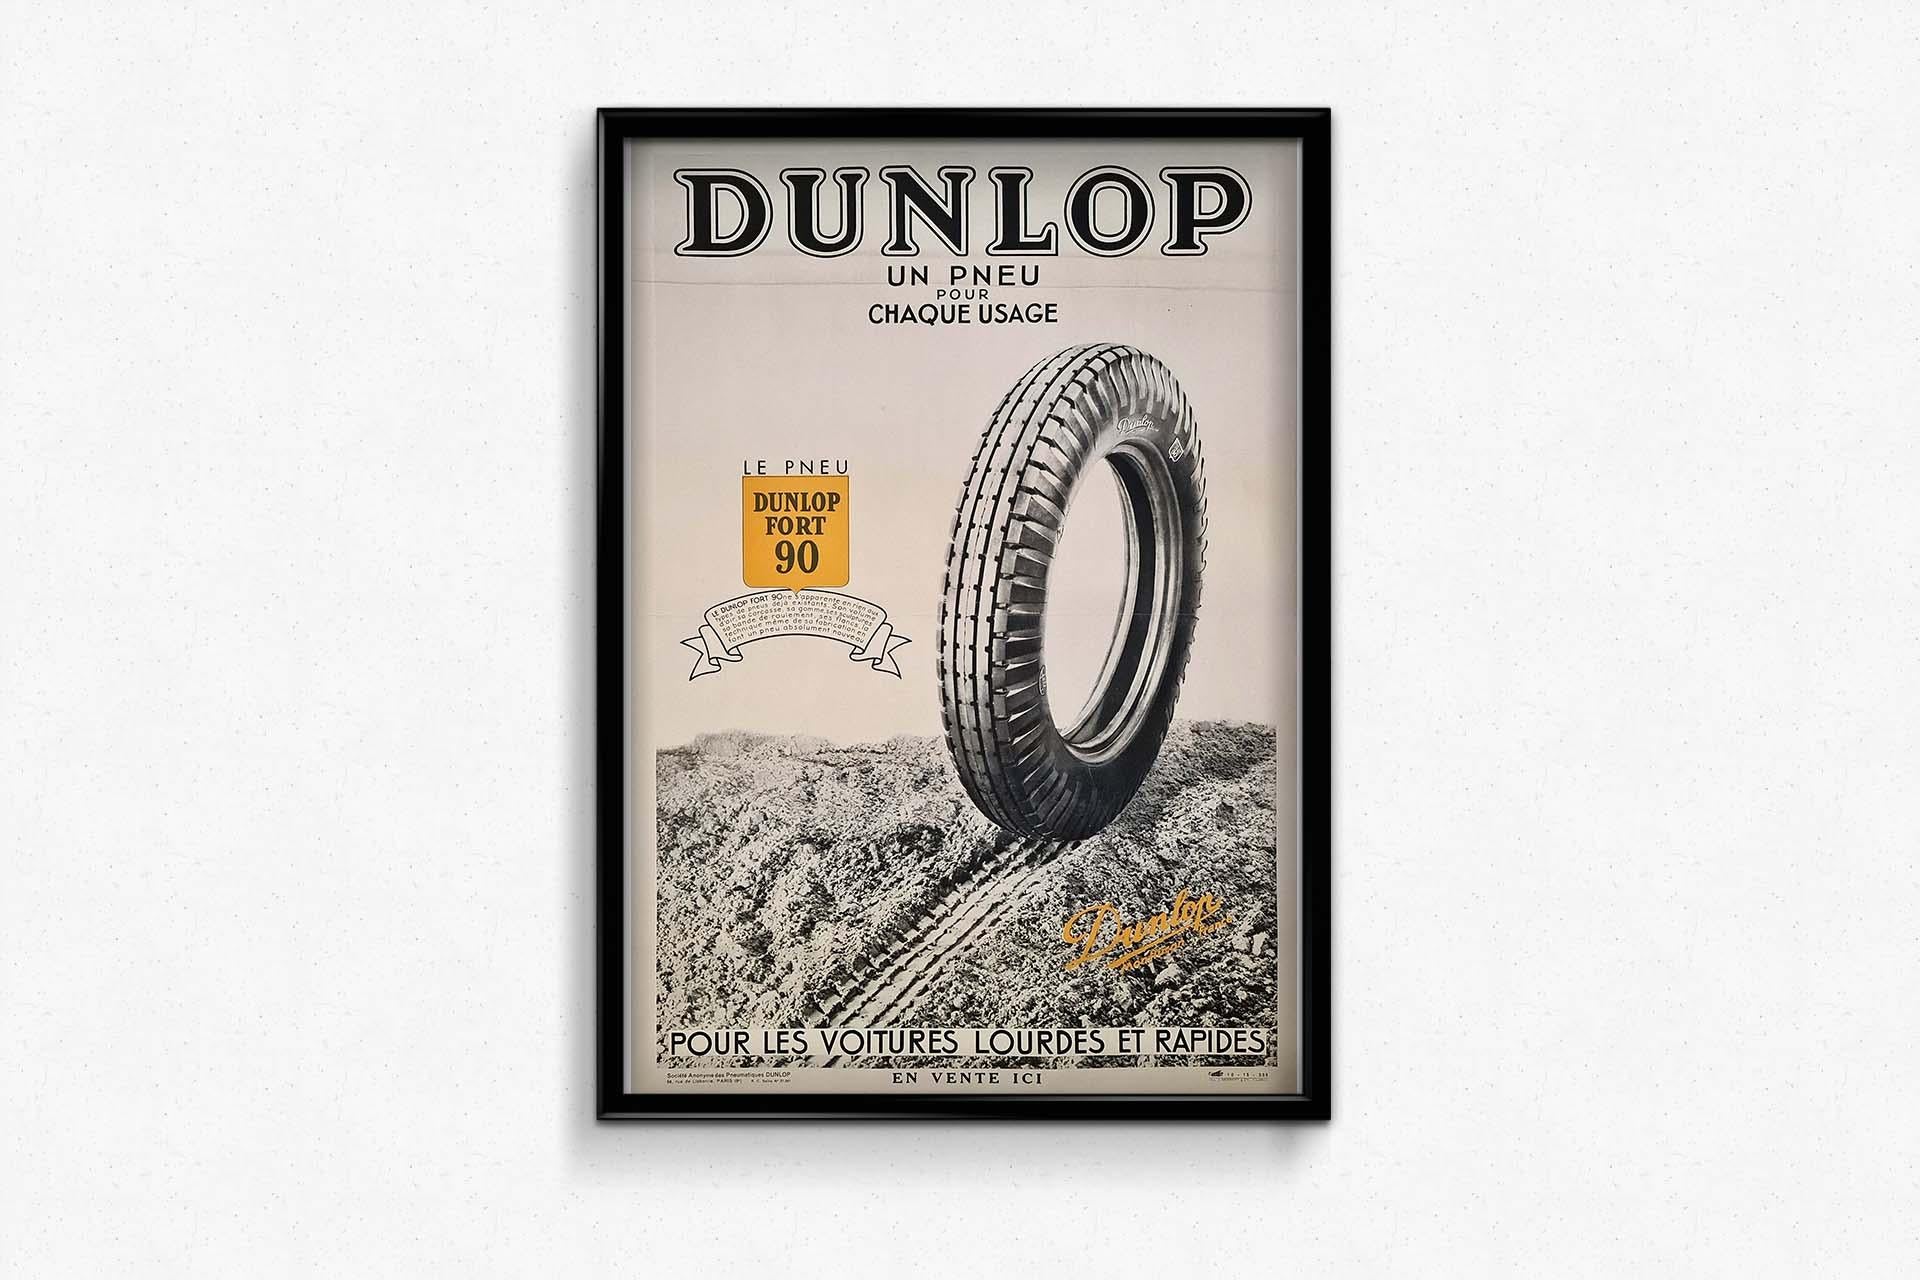 The 1935 original advertising poster for Dunlop introduces viewers to the versatile capabilities of the Dunlop Fort 90 tire, a testament to innovation and reliability in the automotive industry. Crafted with precision and attention to detail, this